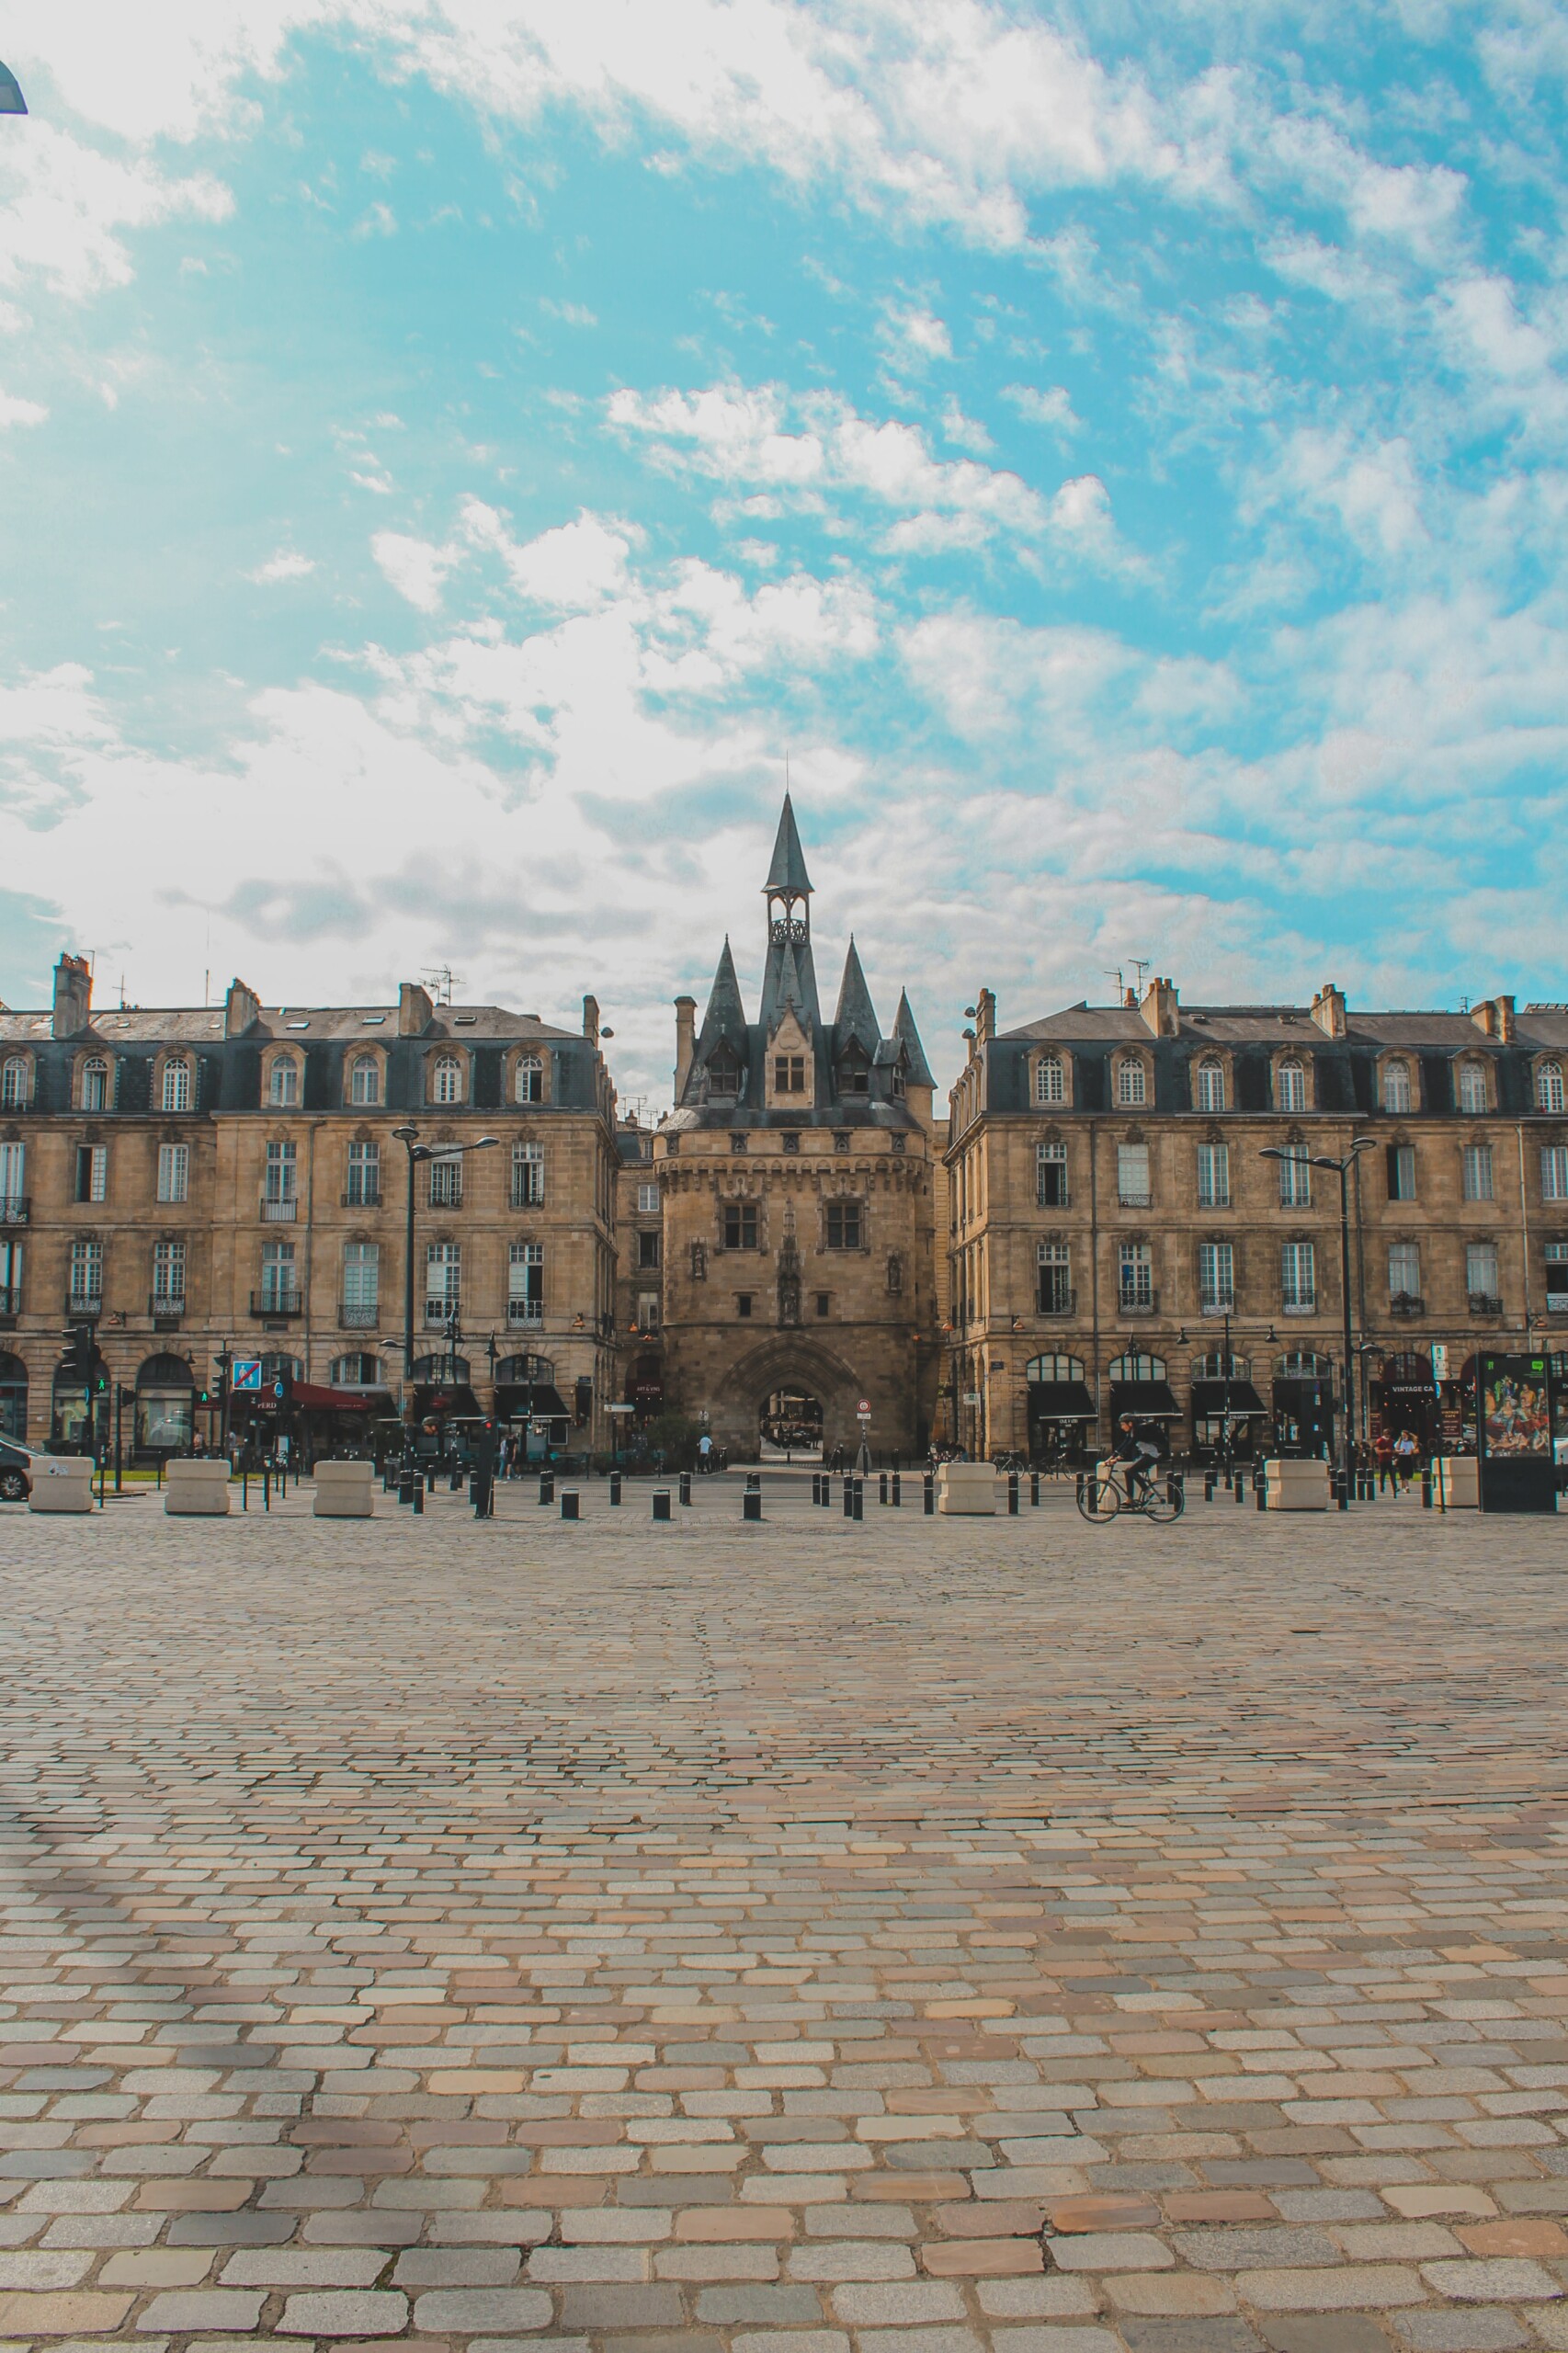 The old city of Bordeaux, France